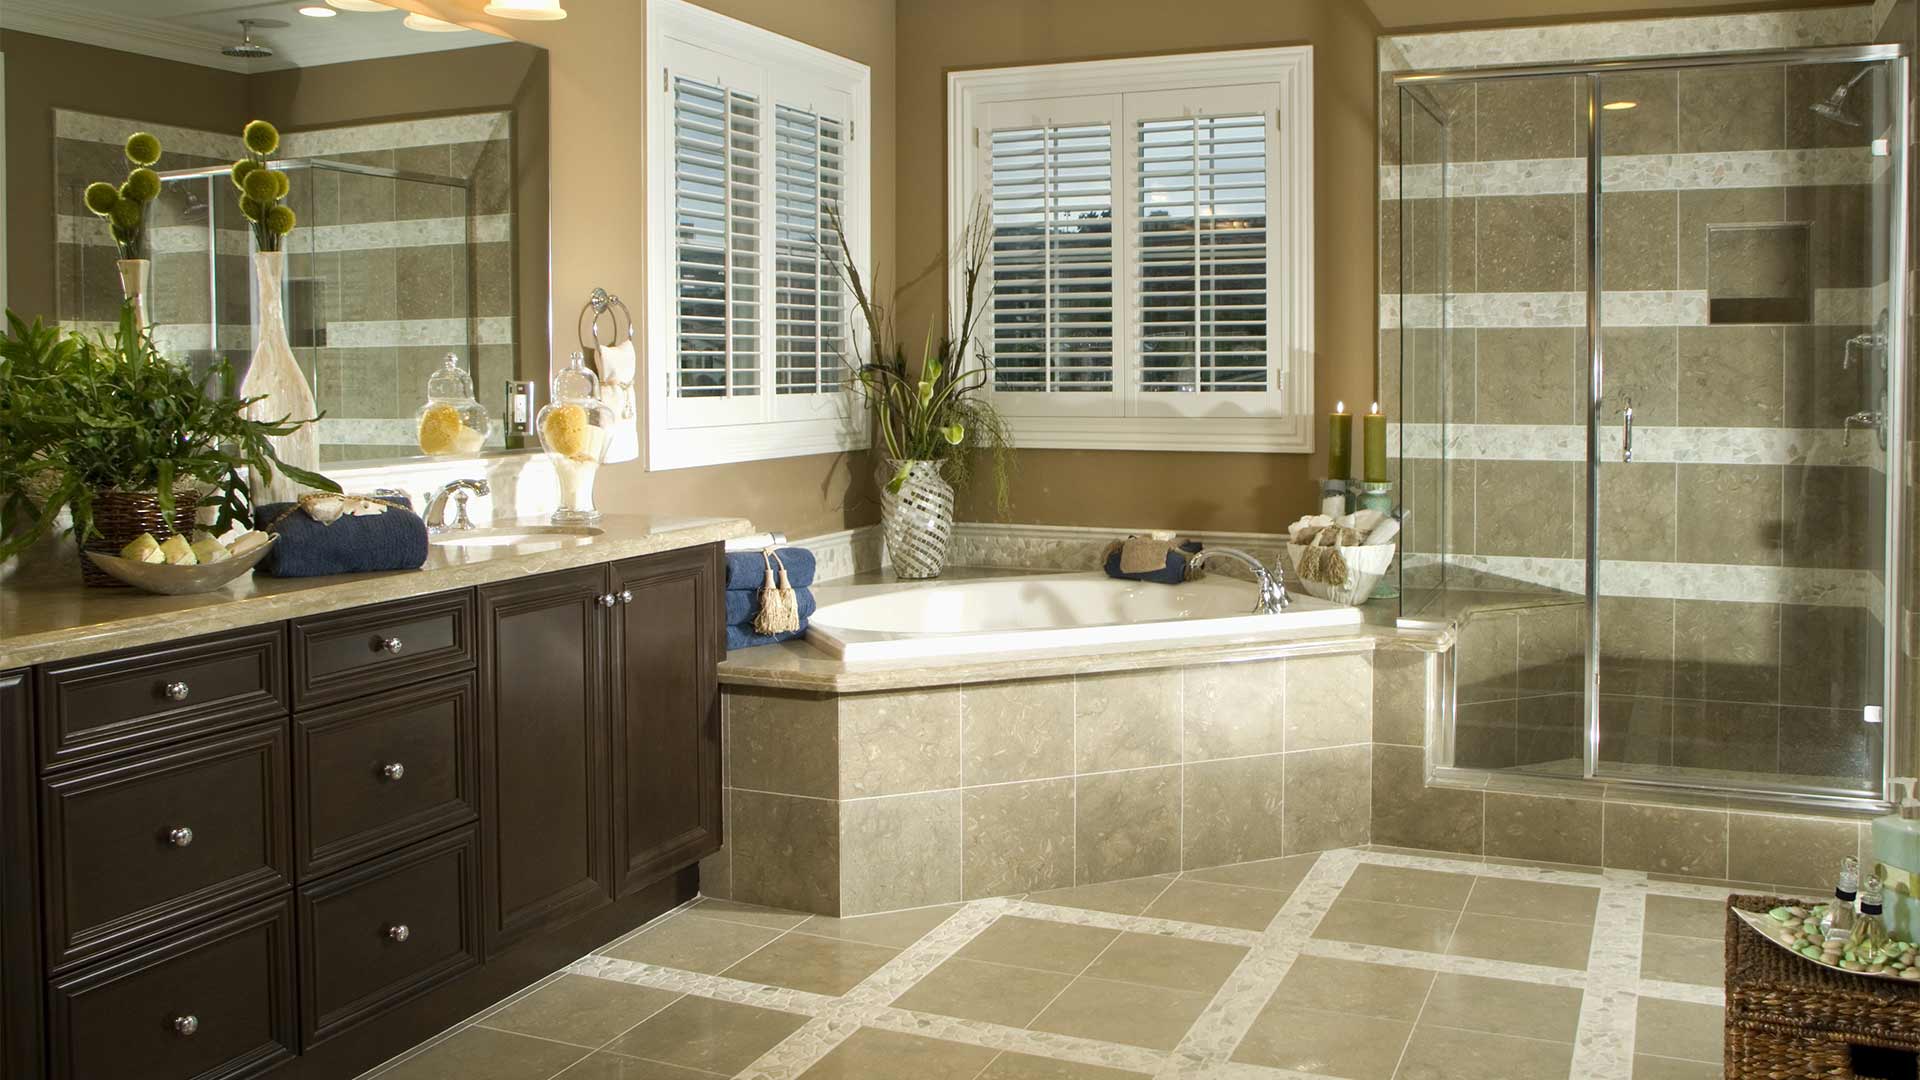 master bathroom interiors with new tile floors installation and countertops desert hot springs ca